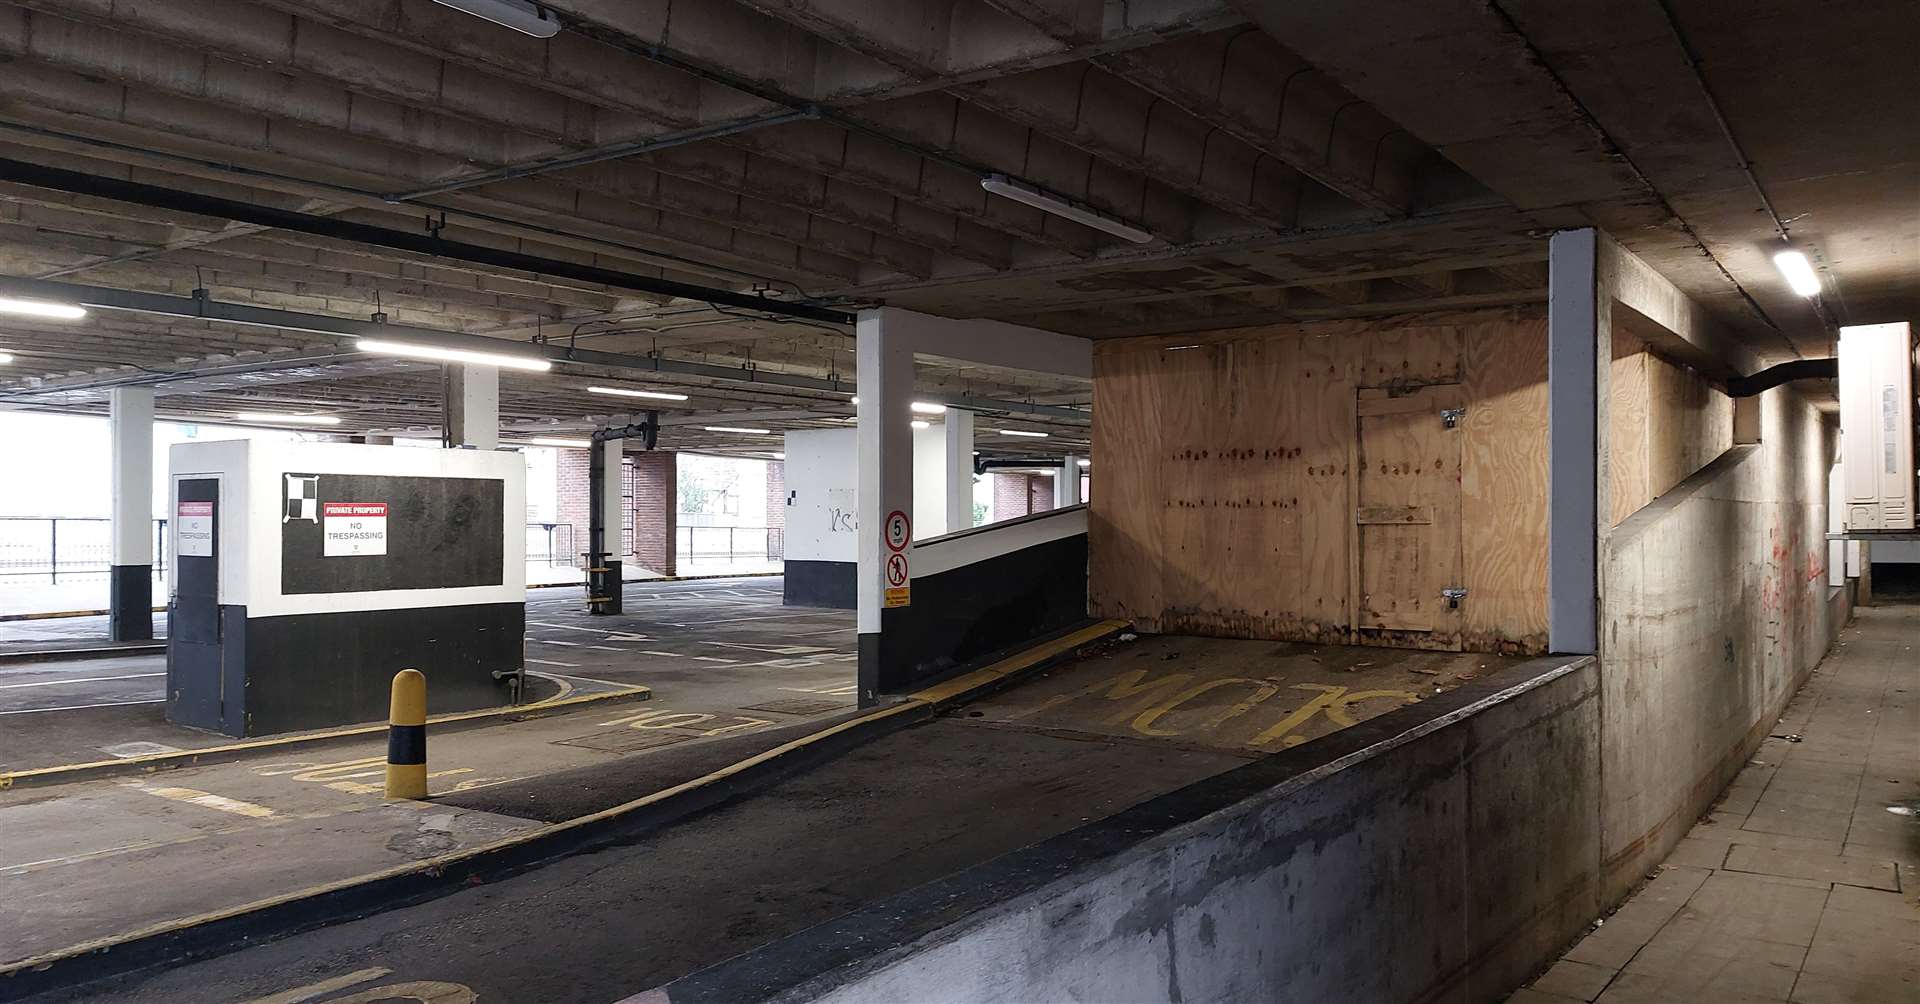 Vandalism forced Ashford Borough Council to close off the top level of Park Mall car park